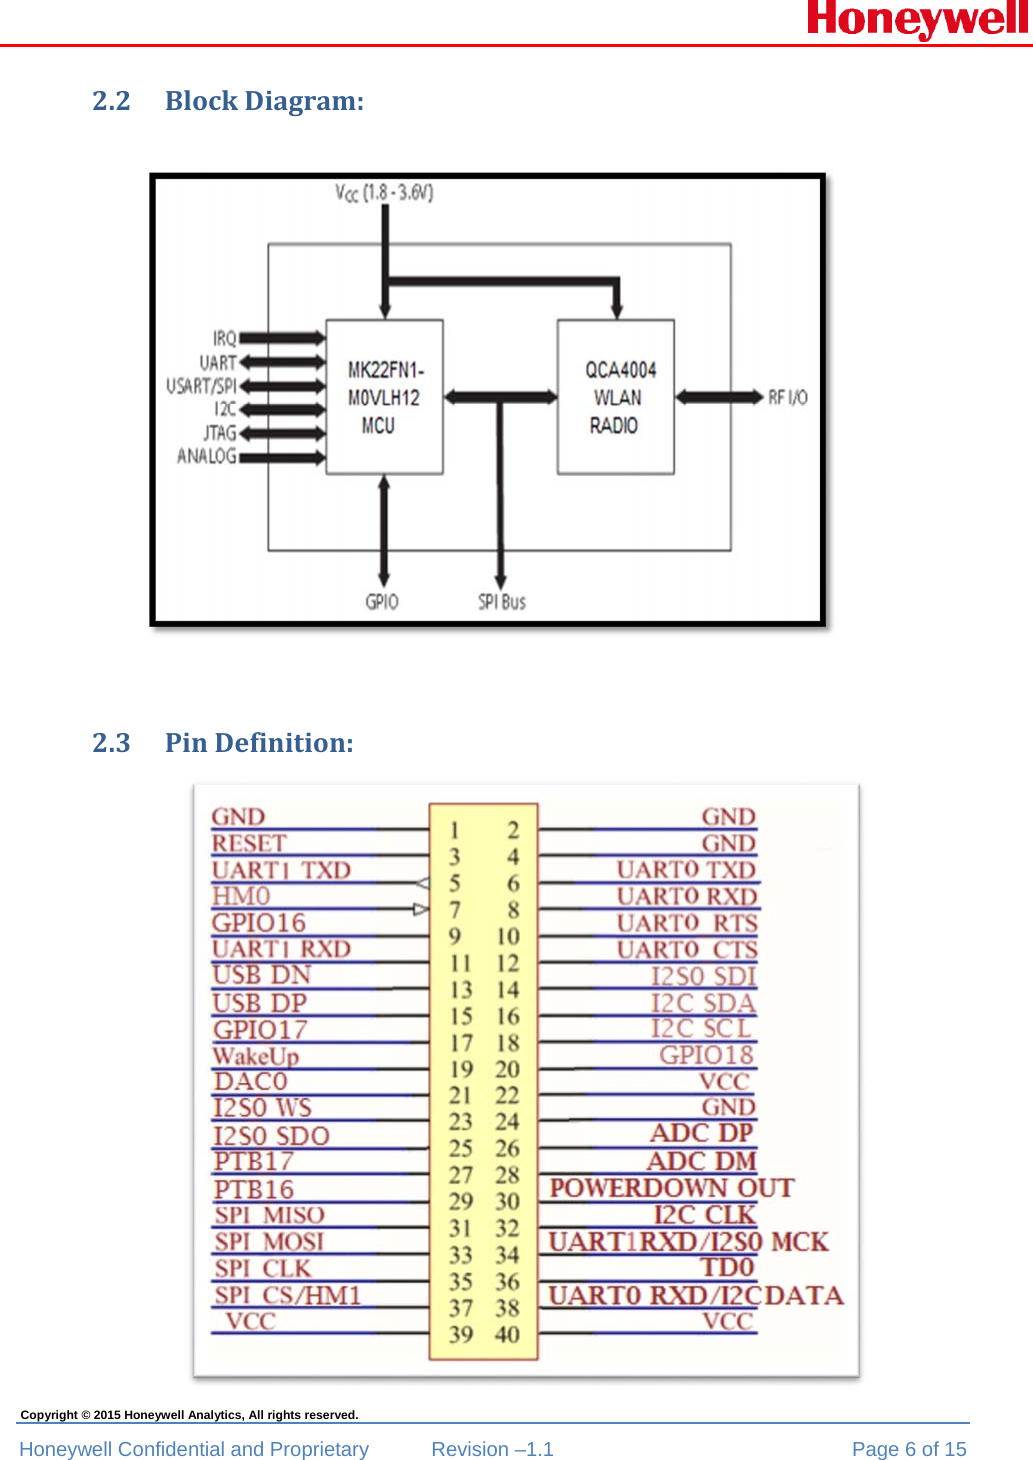  Honeywell Confidential and Proprietary  Revision –1.1  Page 6 of 15 Copyright © 2015 Honeywell Analytics, All rights reserved. 2.2 BlockDiagram: 2.3 PinDefinition: 